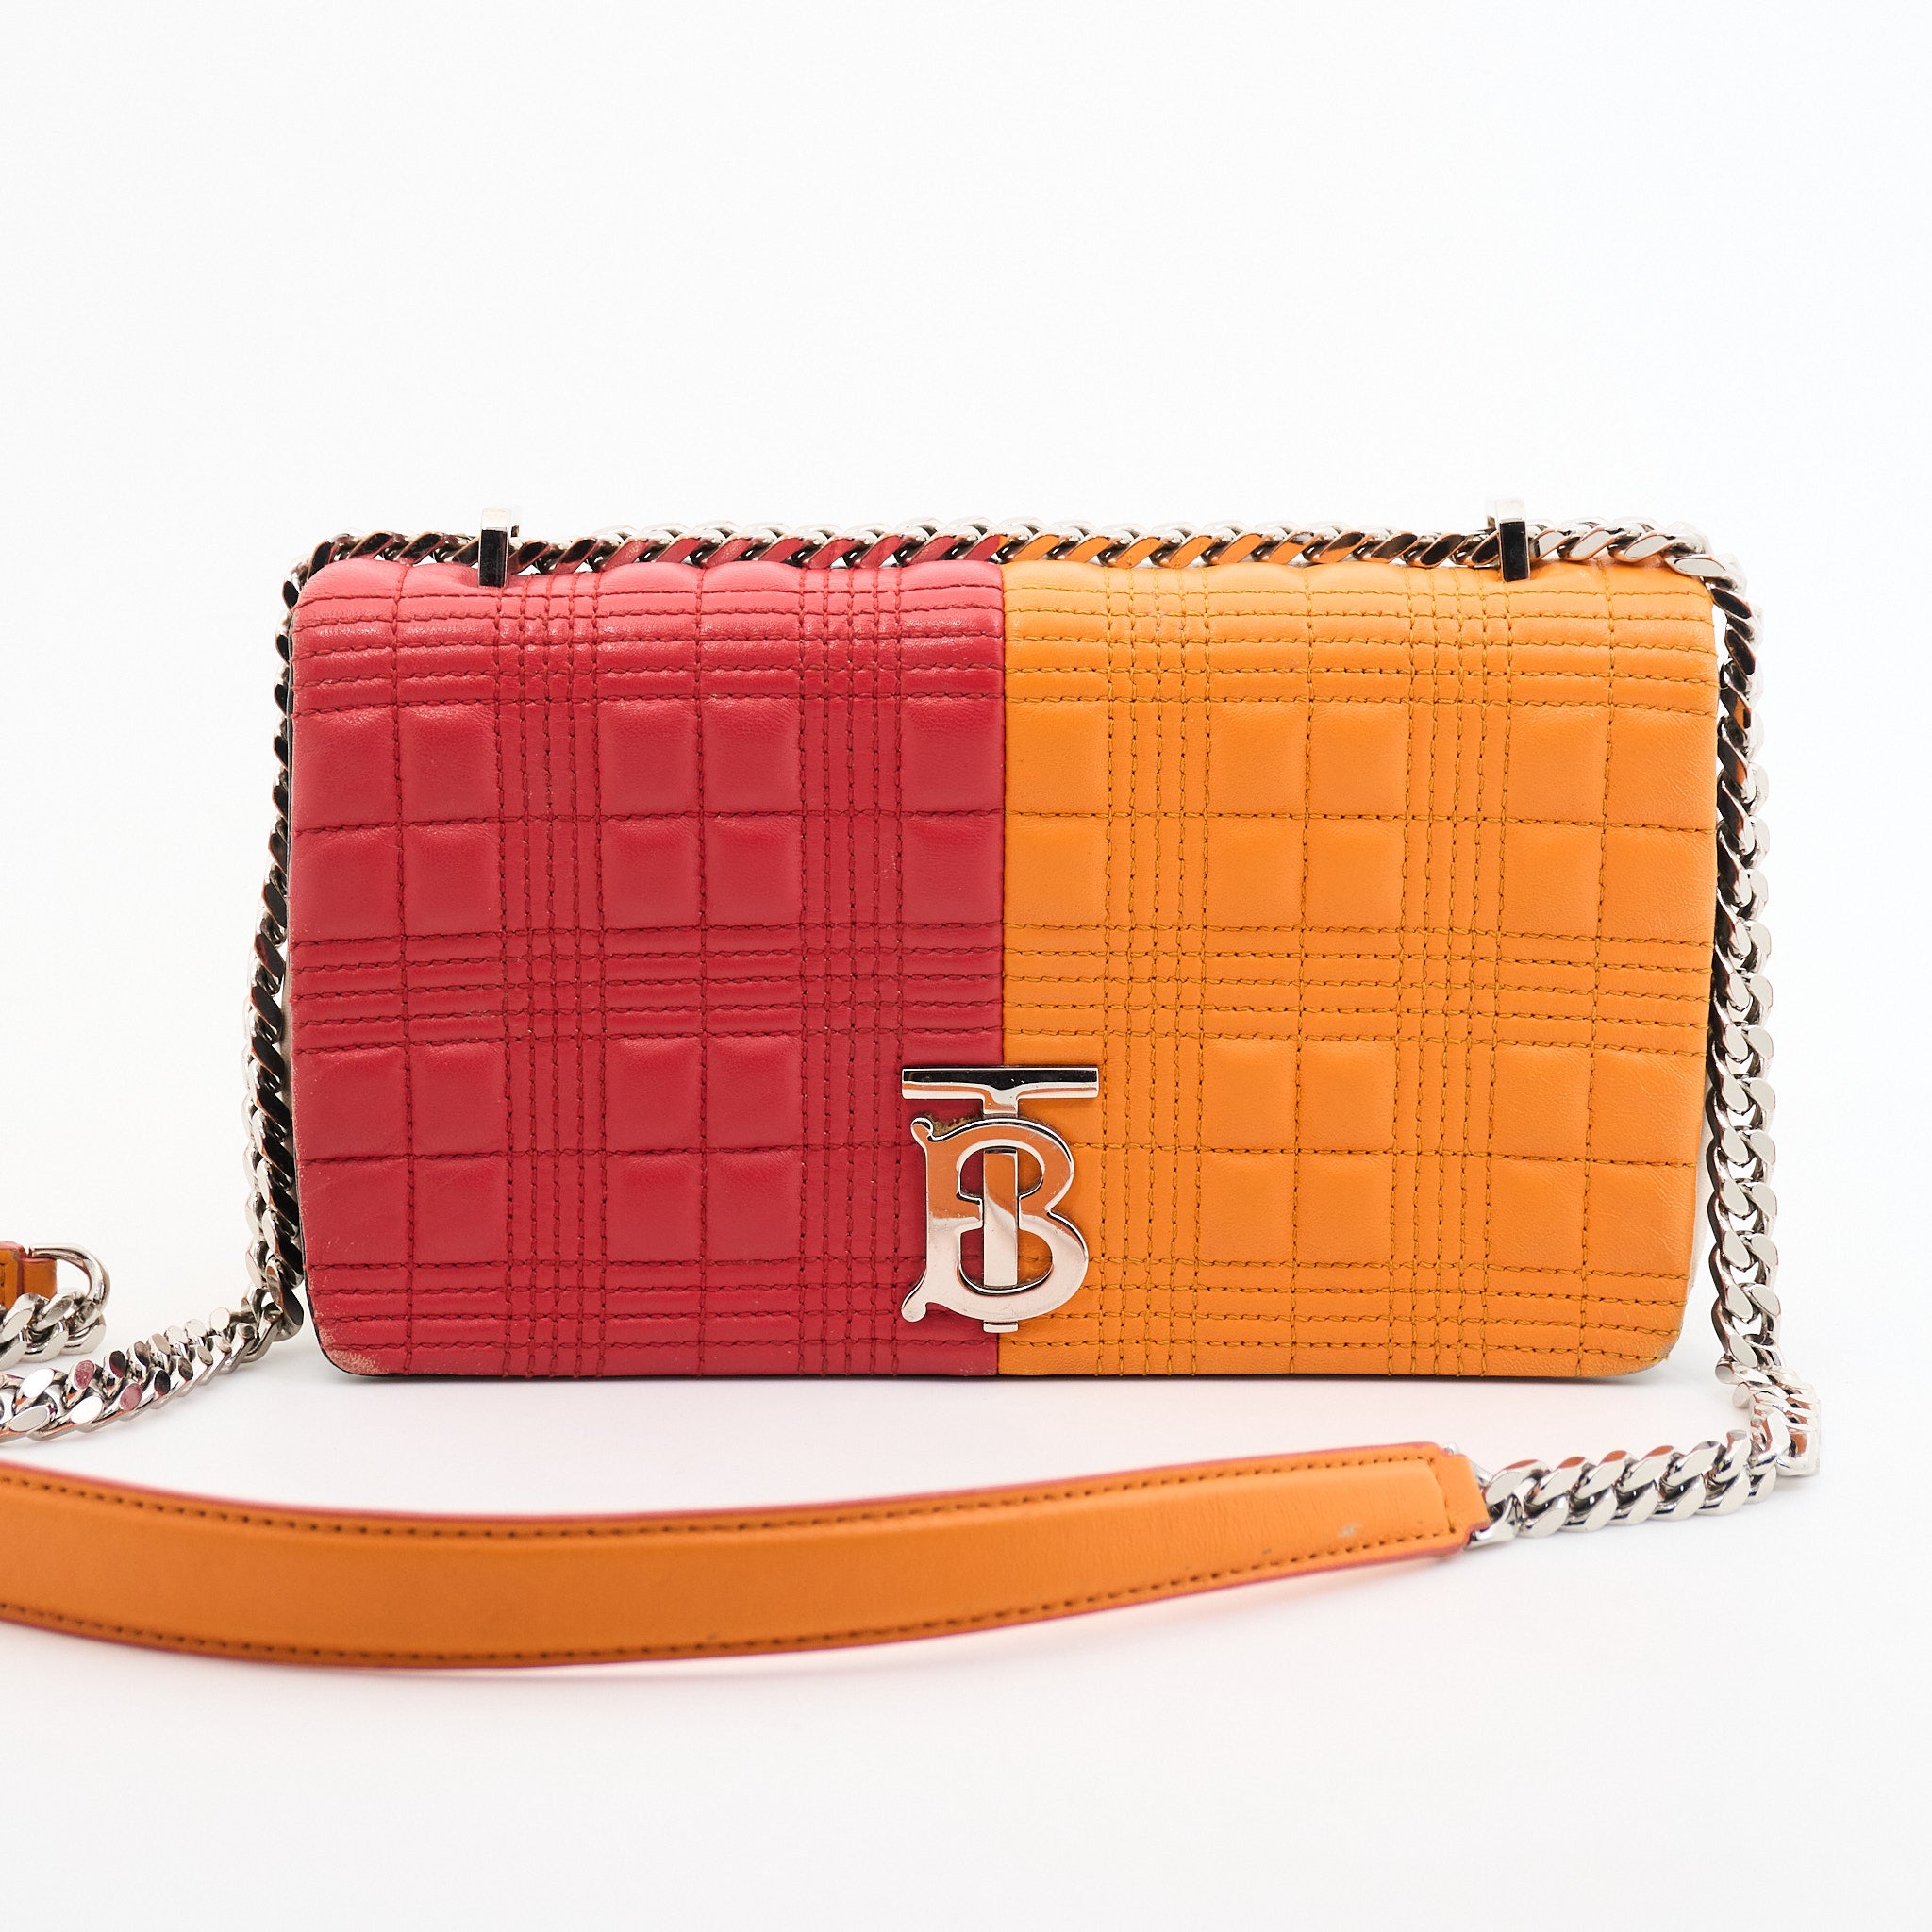 Burberry Leather Quilted Crossbody in Orange and Red